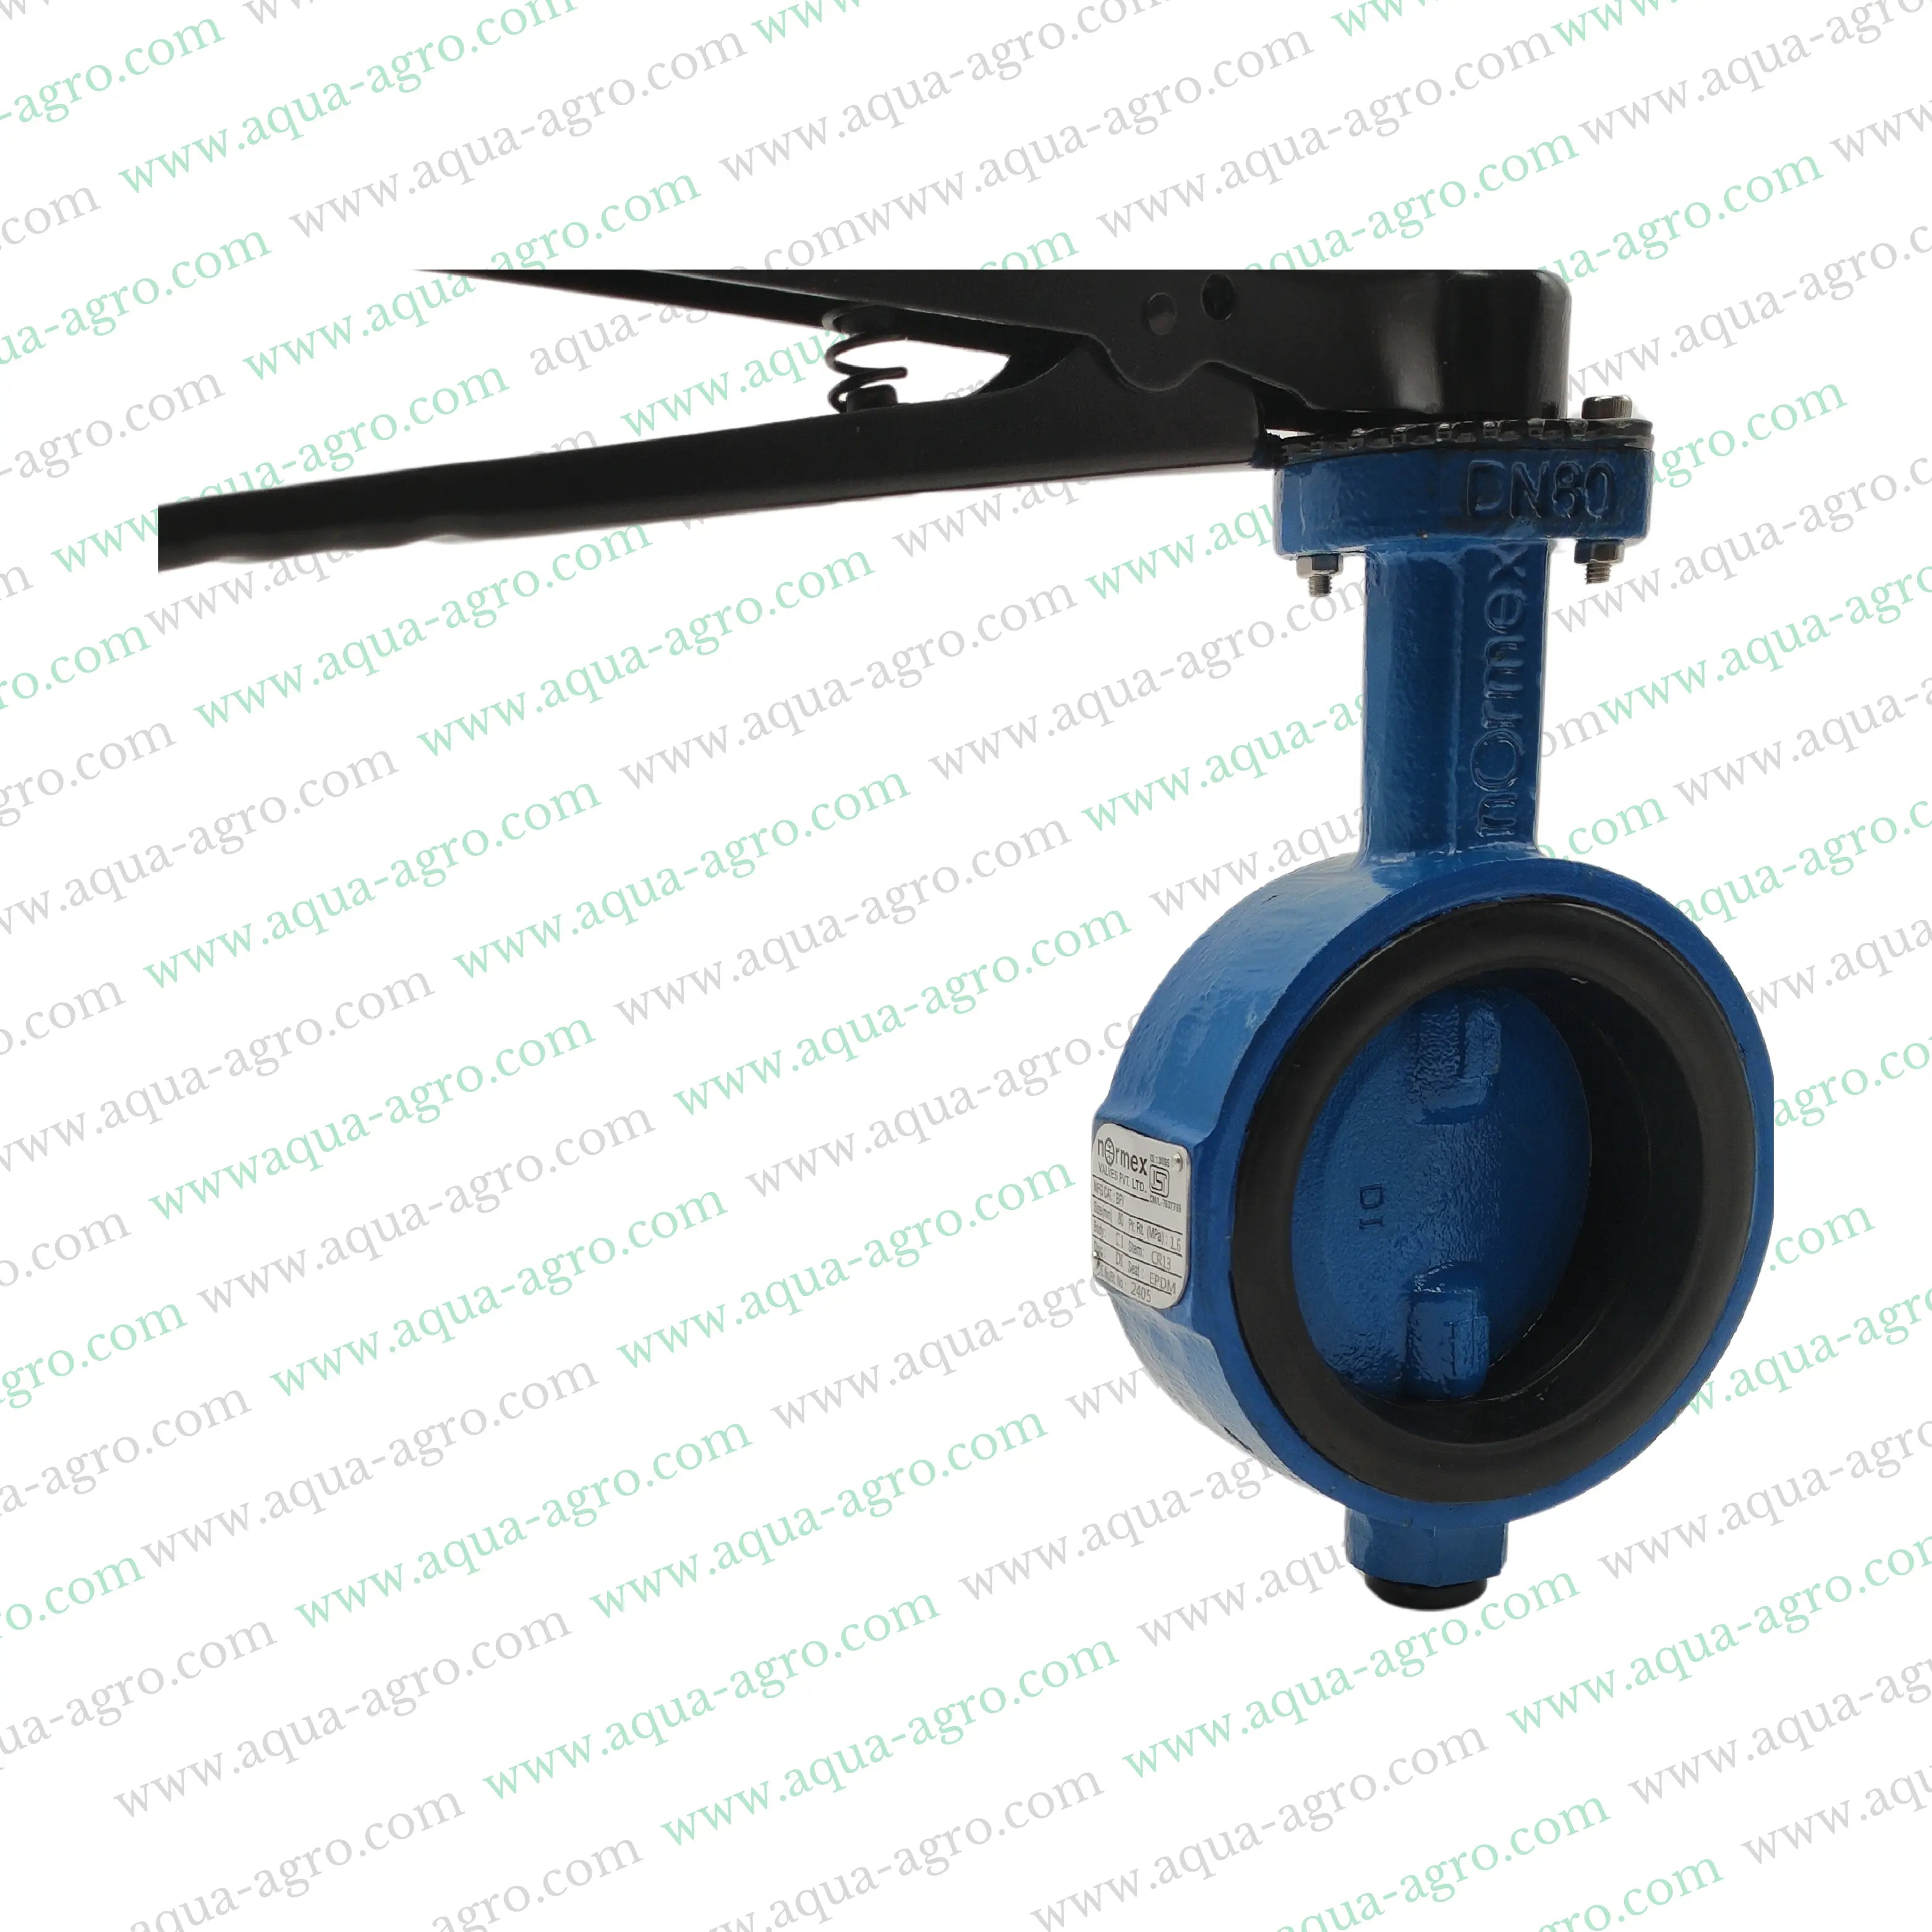 NORMEX | Valves - Butterfly Valves - Metal - C.I Body with SG Metal disc - 3" (80mm)